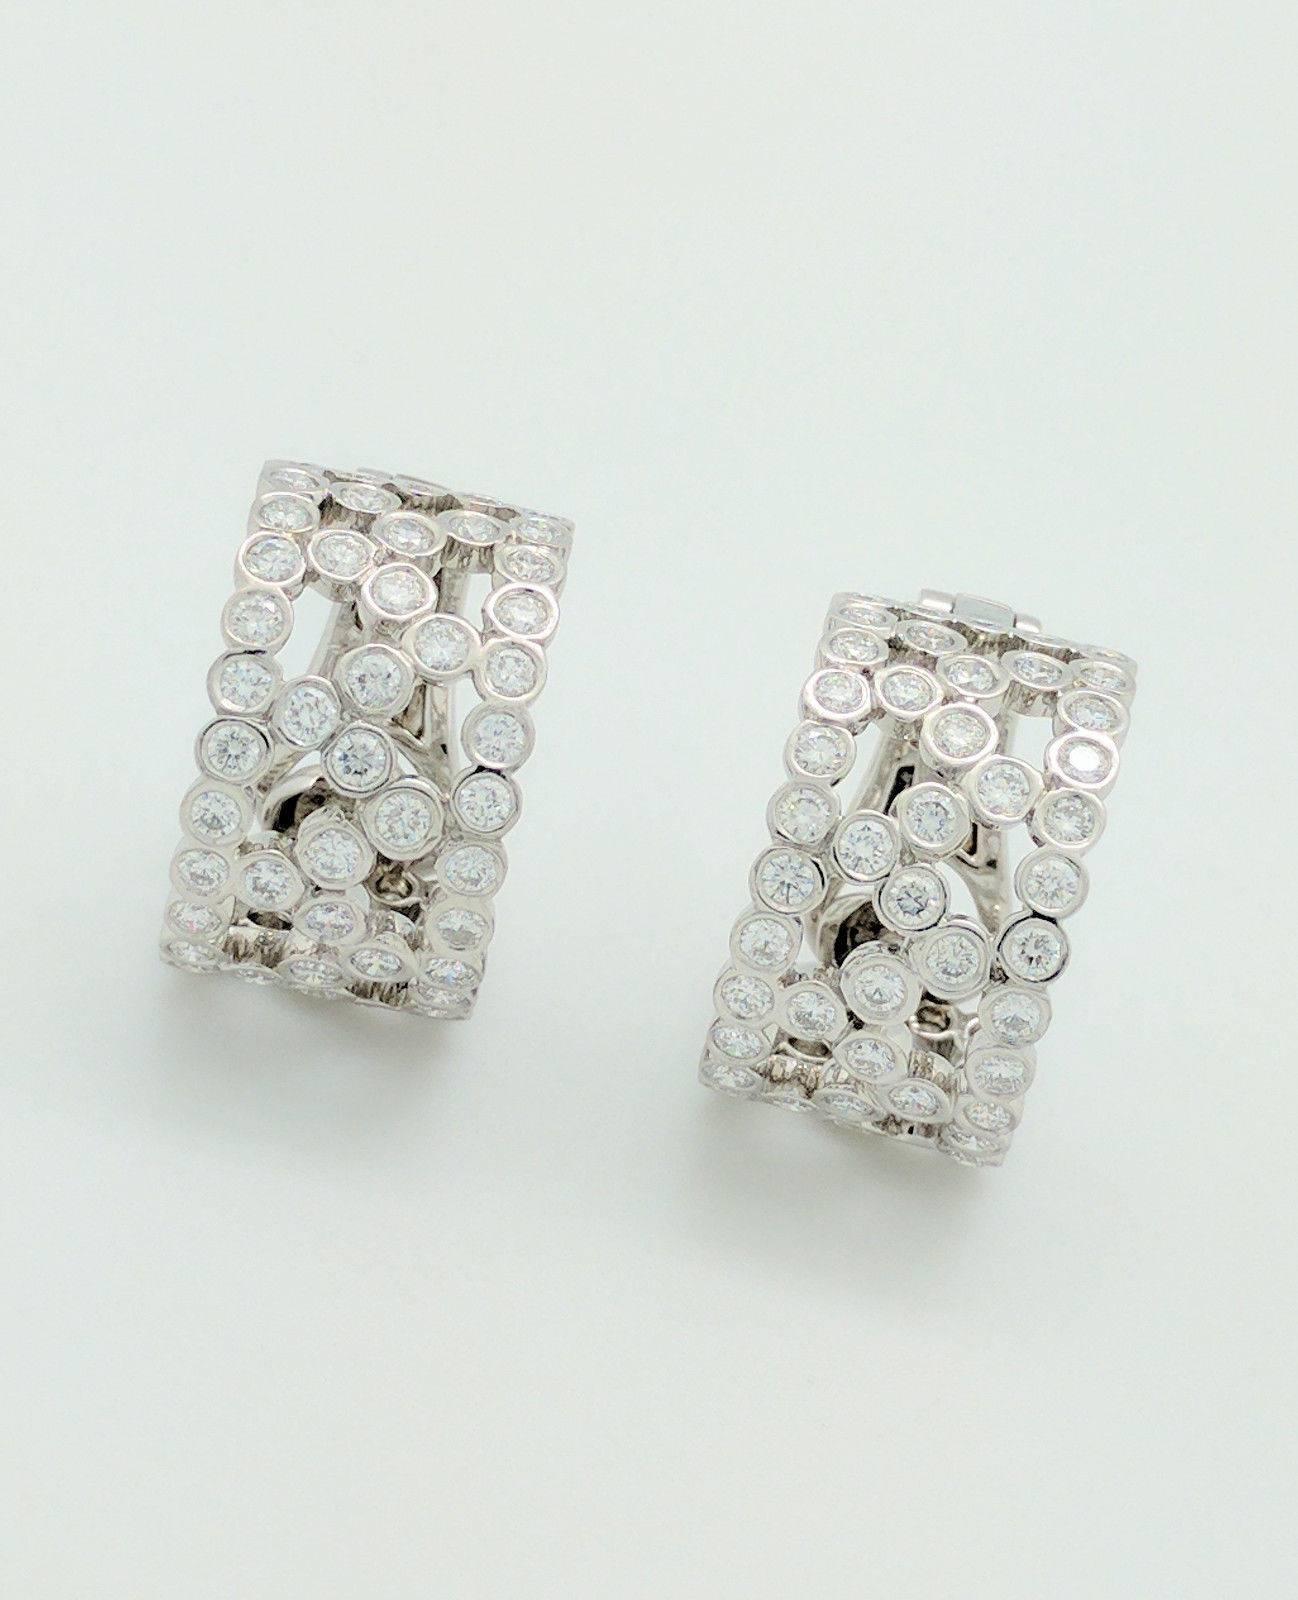  You are viewing a pair of authentic retired Tiffany & Co. 3.54ctw diamond half hoop earrings from the Bubbles Collection.
The earrings are crafted from platinum and weigh 17.8 grams. Each earring features (59) .03ct natural round bezel set